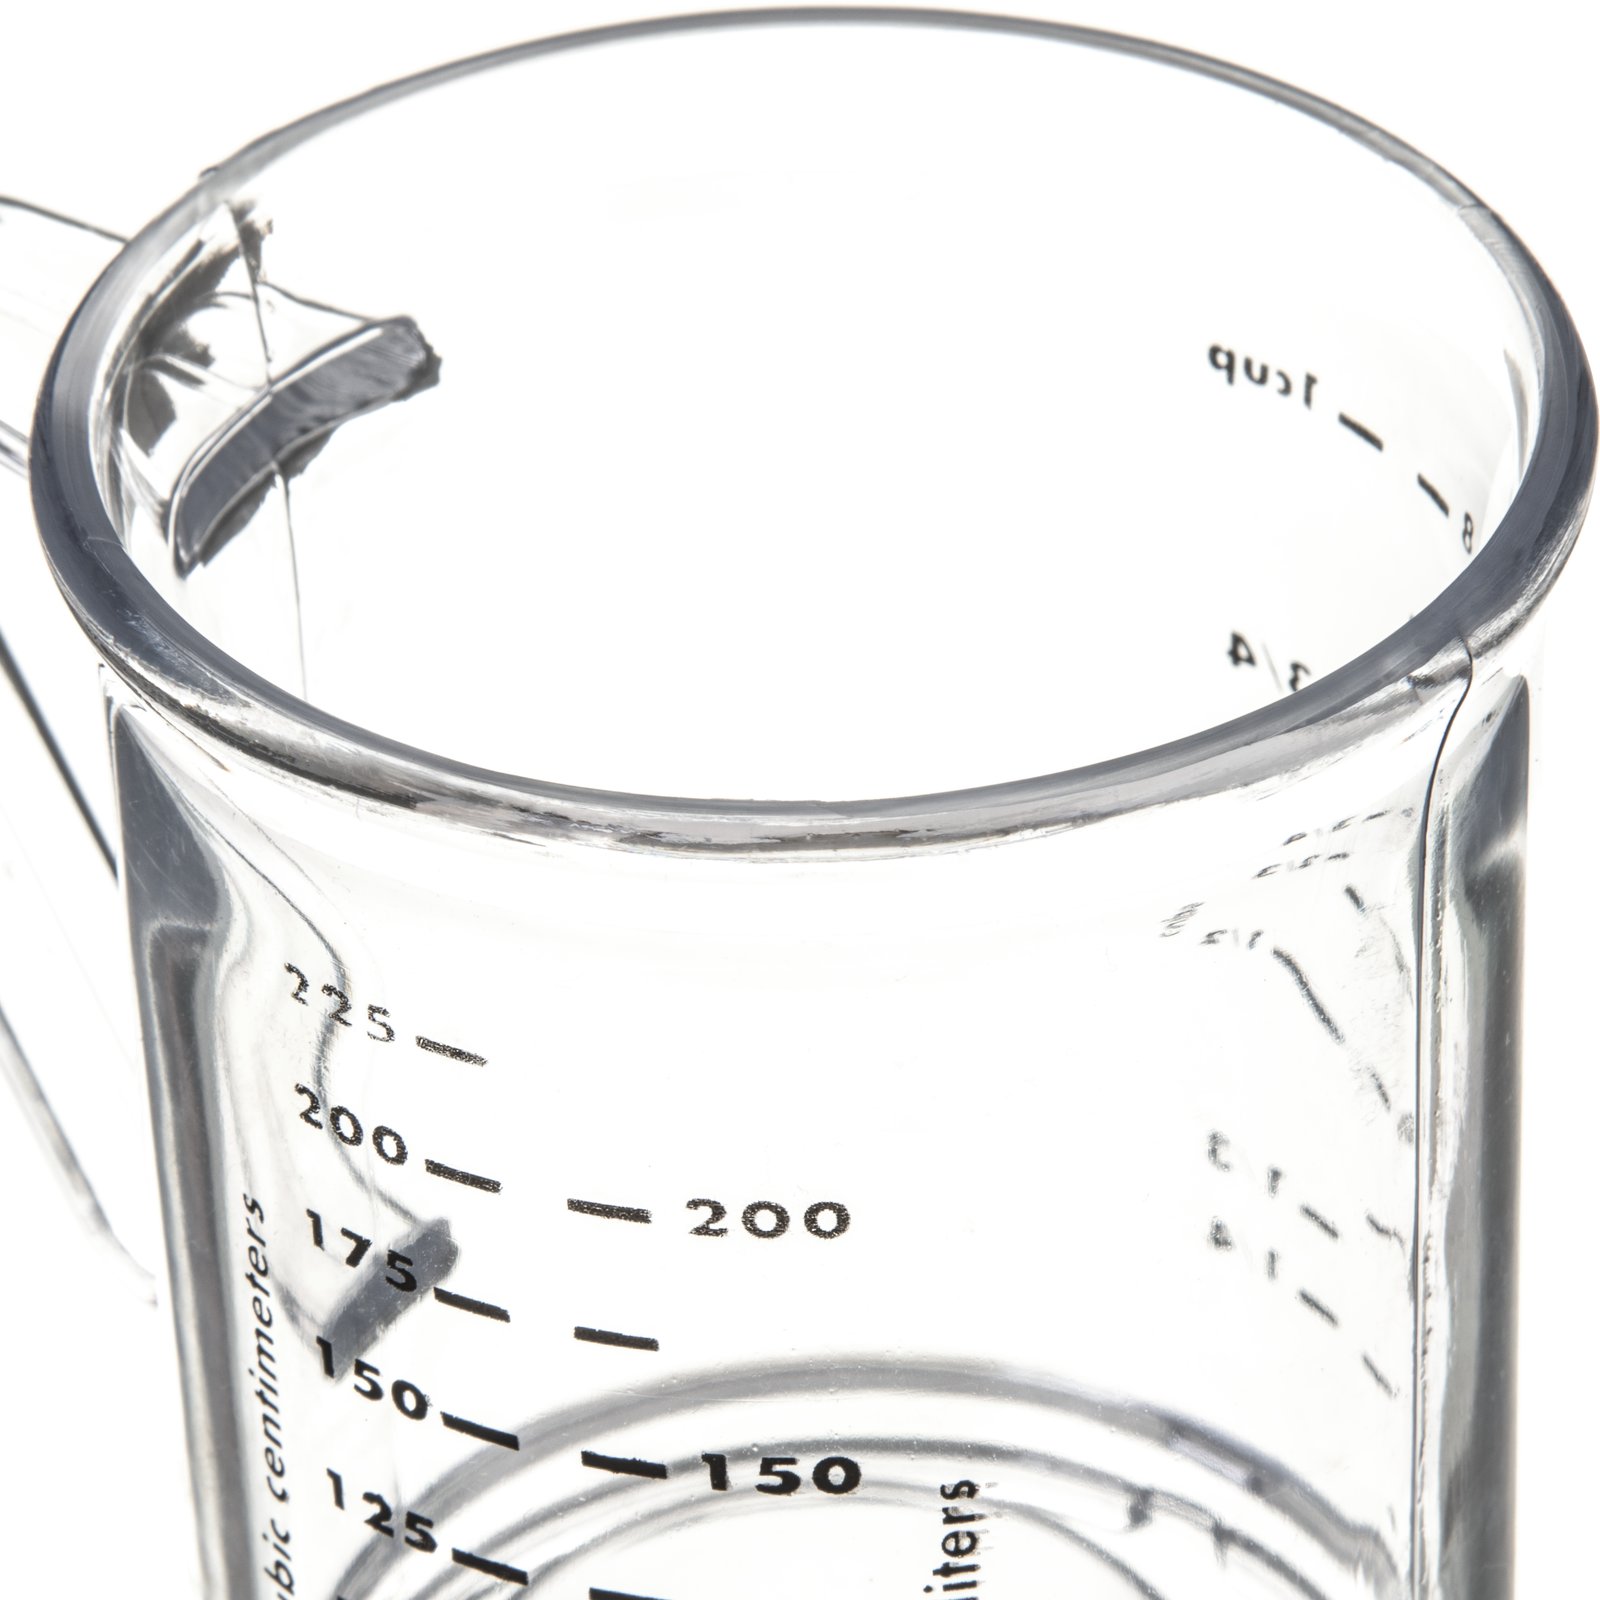 Measuring Cup, 1 cup (0.25 liter) capacity, printed with US/metric  measurements, dishwasher safe